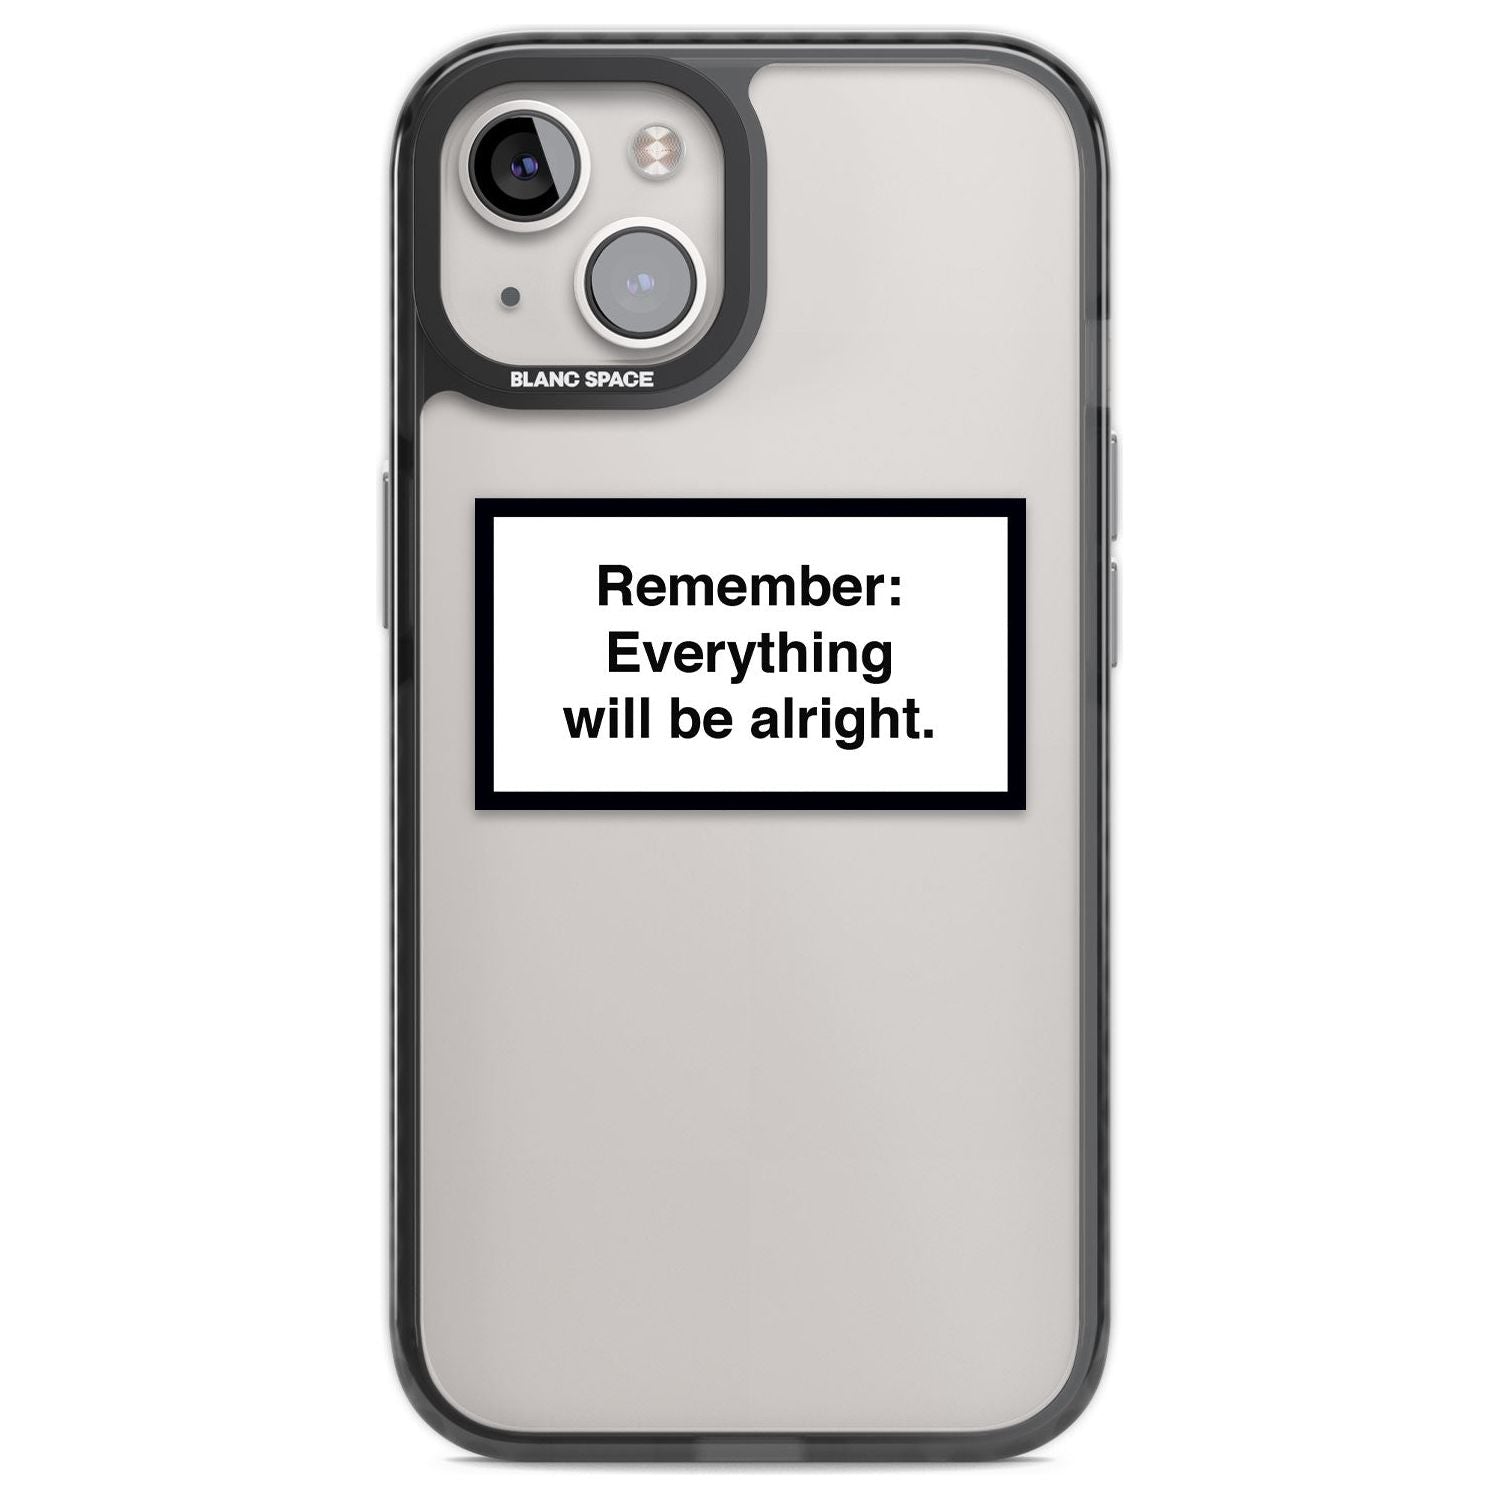 Everything Will Be Alright Phone Case iPhone 12 / Black Impact Case,iPhone 13 / Black Impact Case,iPhone 12 Pro / Black Impact Case,iPhone 14 / Black Impact Case,iPhone 15 Plus / Black Impact Case,iPhone 15 / Black Impact Case Blanc Space